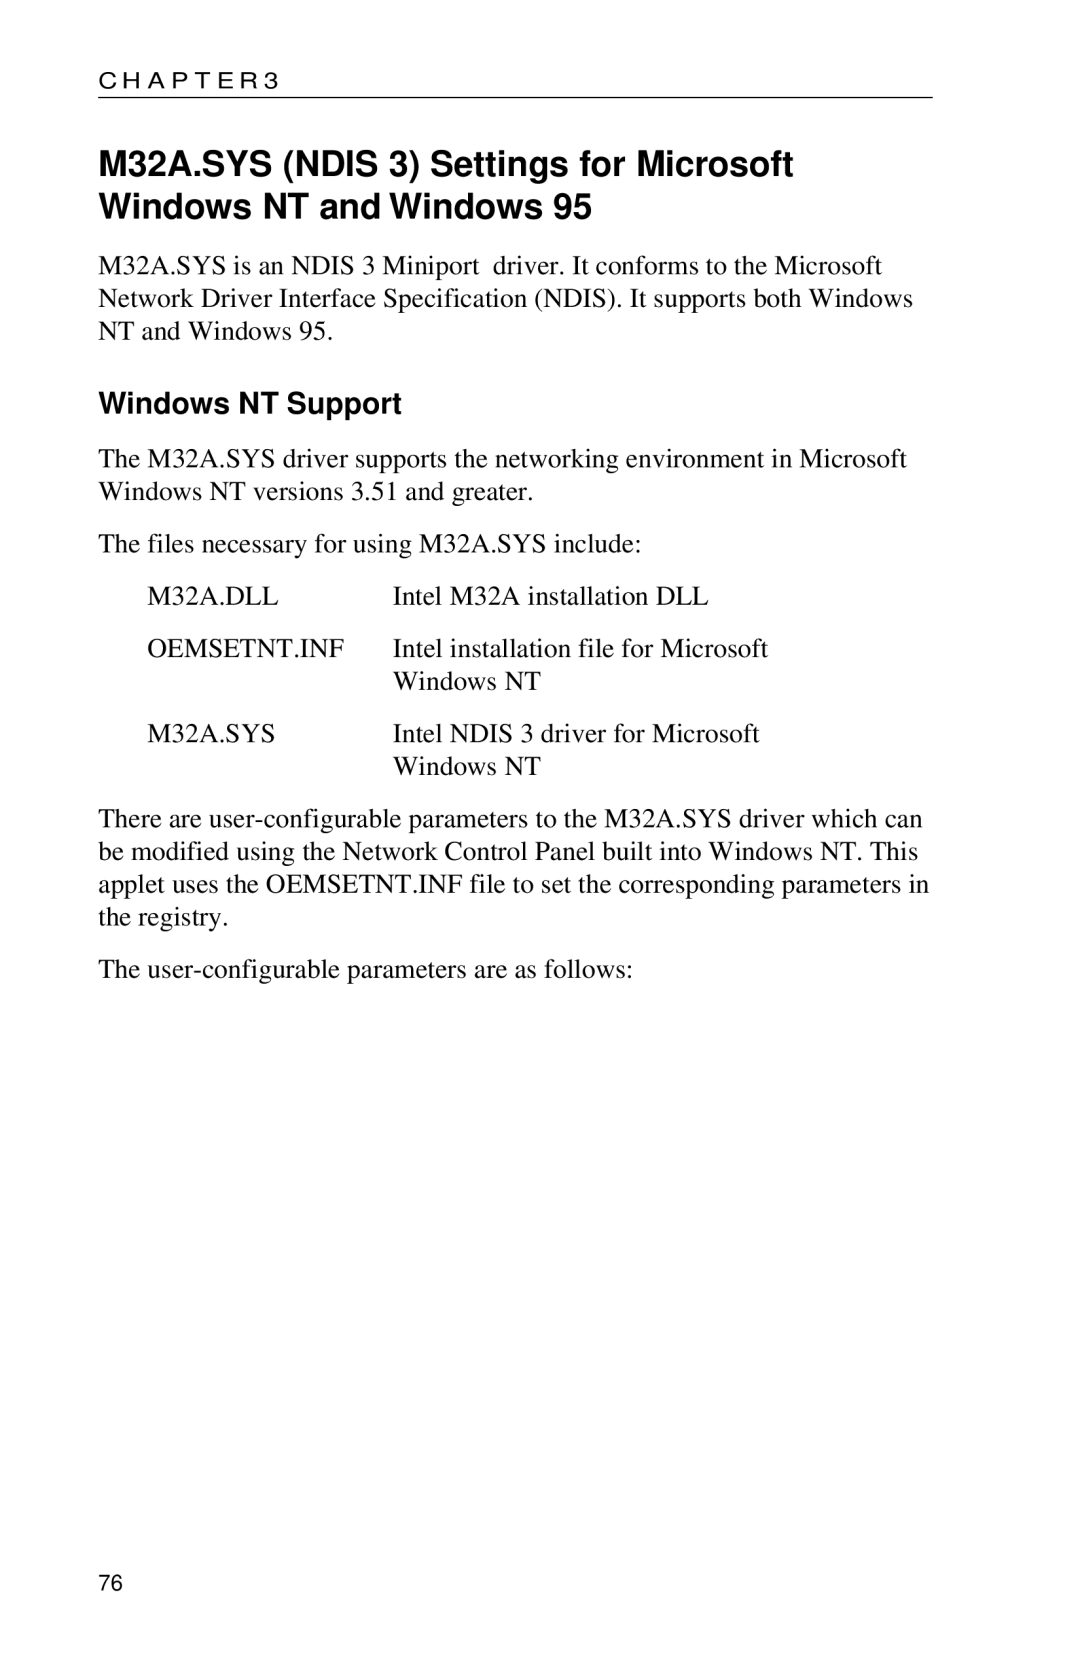 Intel PRO appendix Windows NT Support, M32A.SYS 